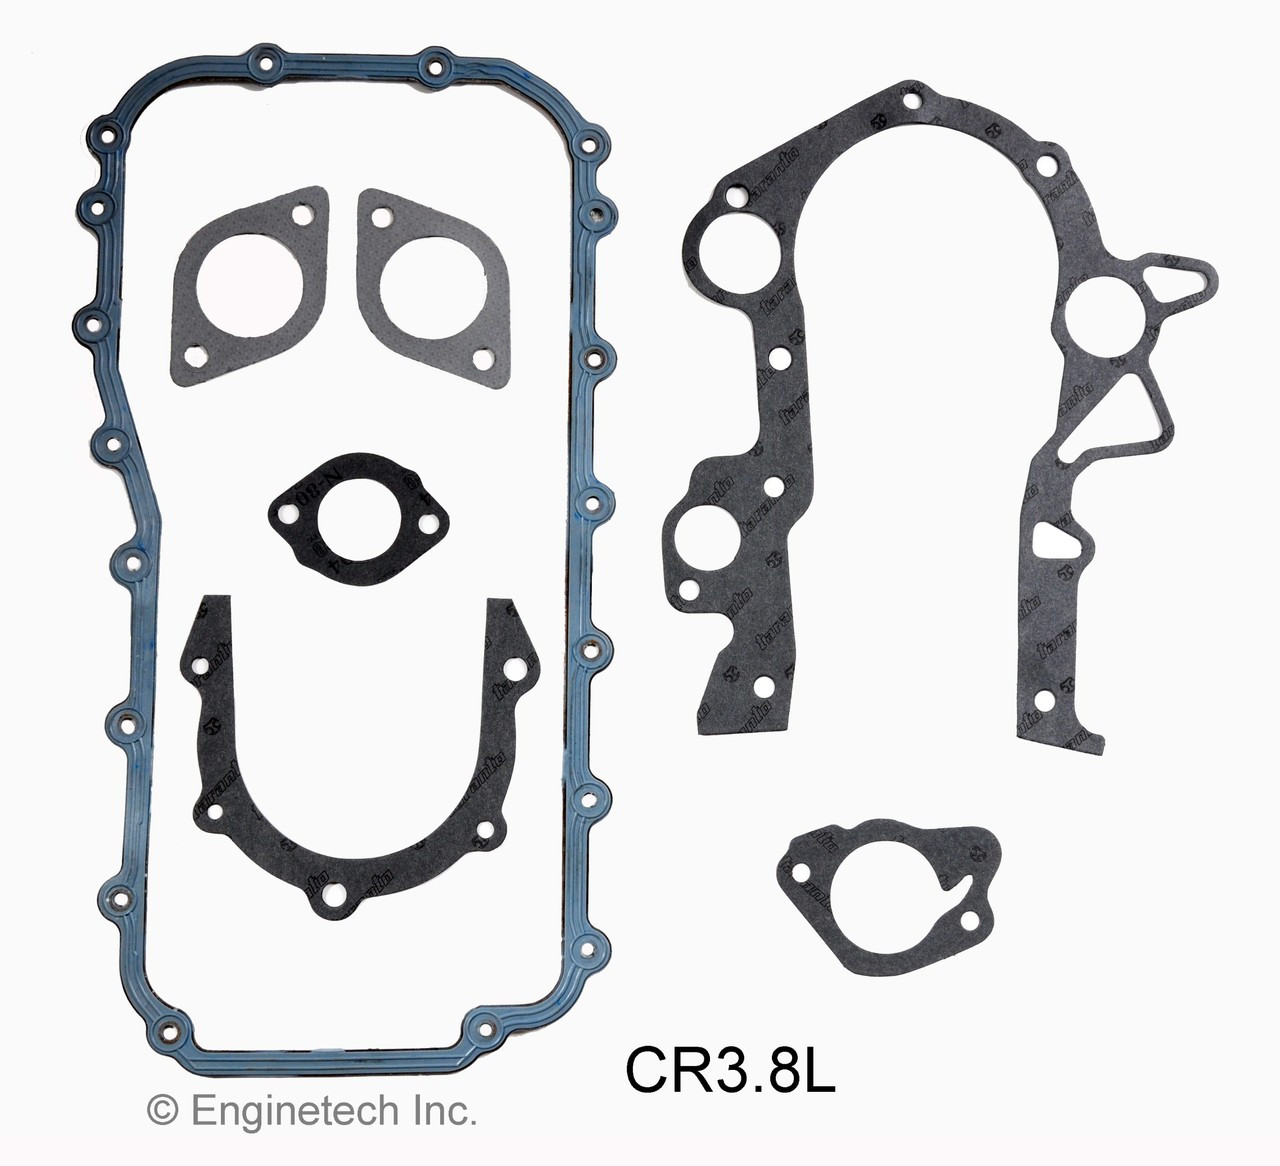 1995 Plymouth Grand Voyager 3.8L Engine Gasket Set CR3.8L -12